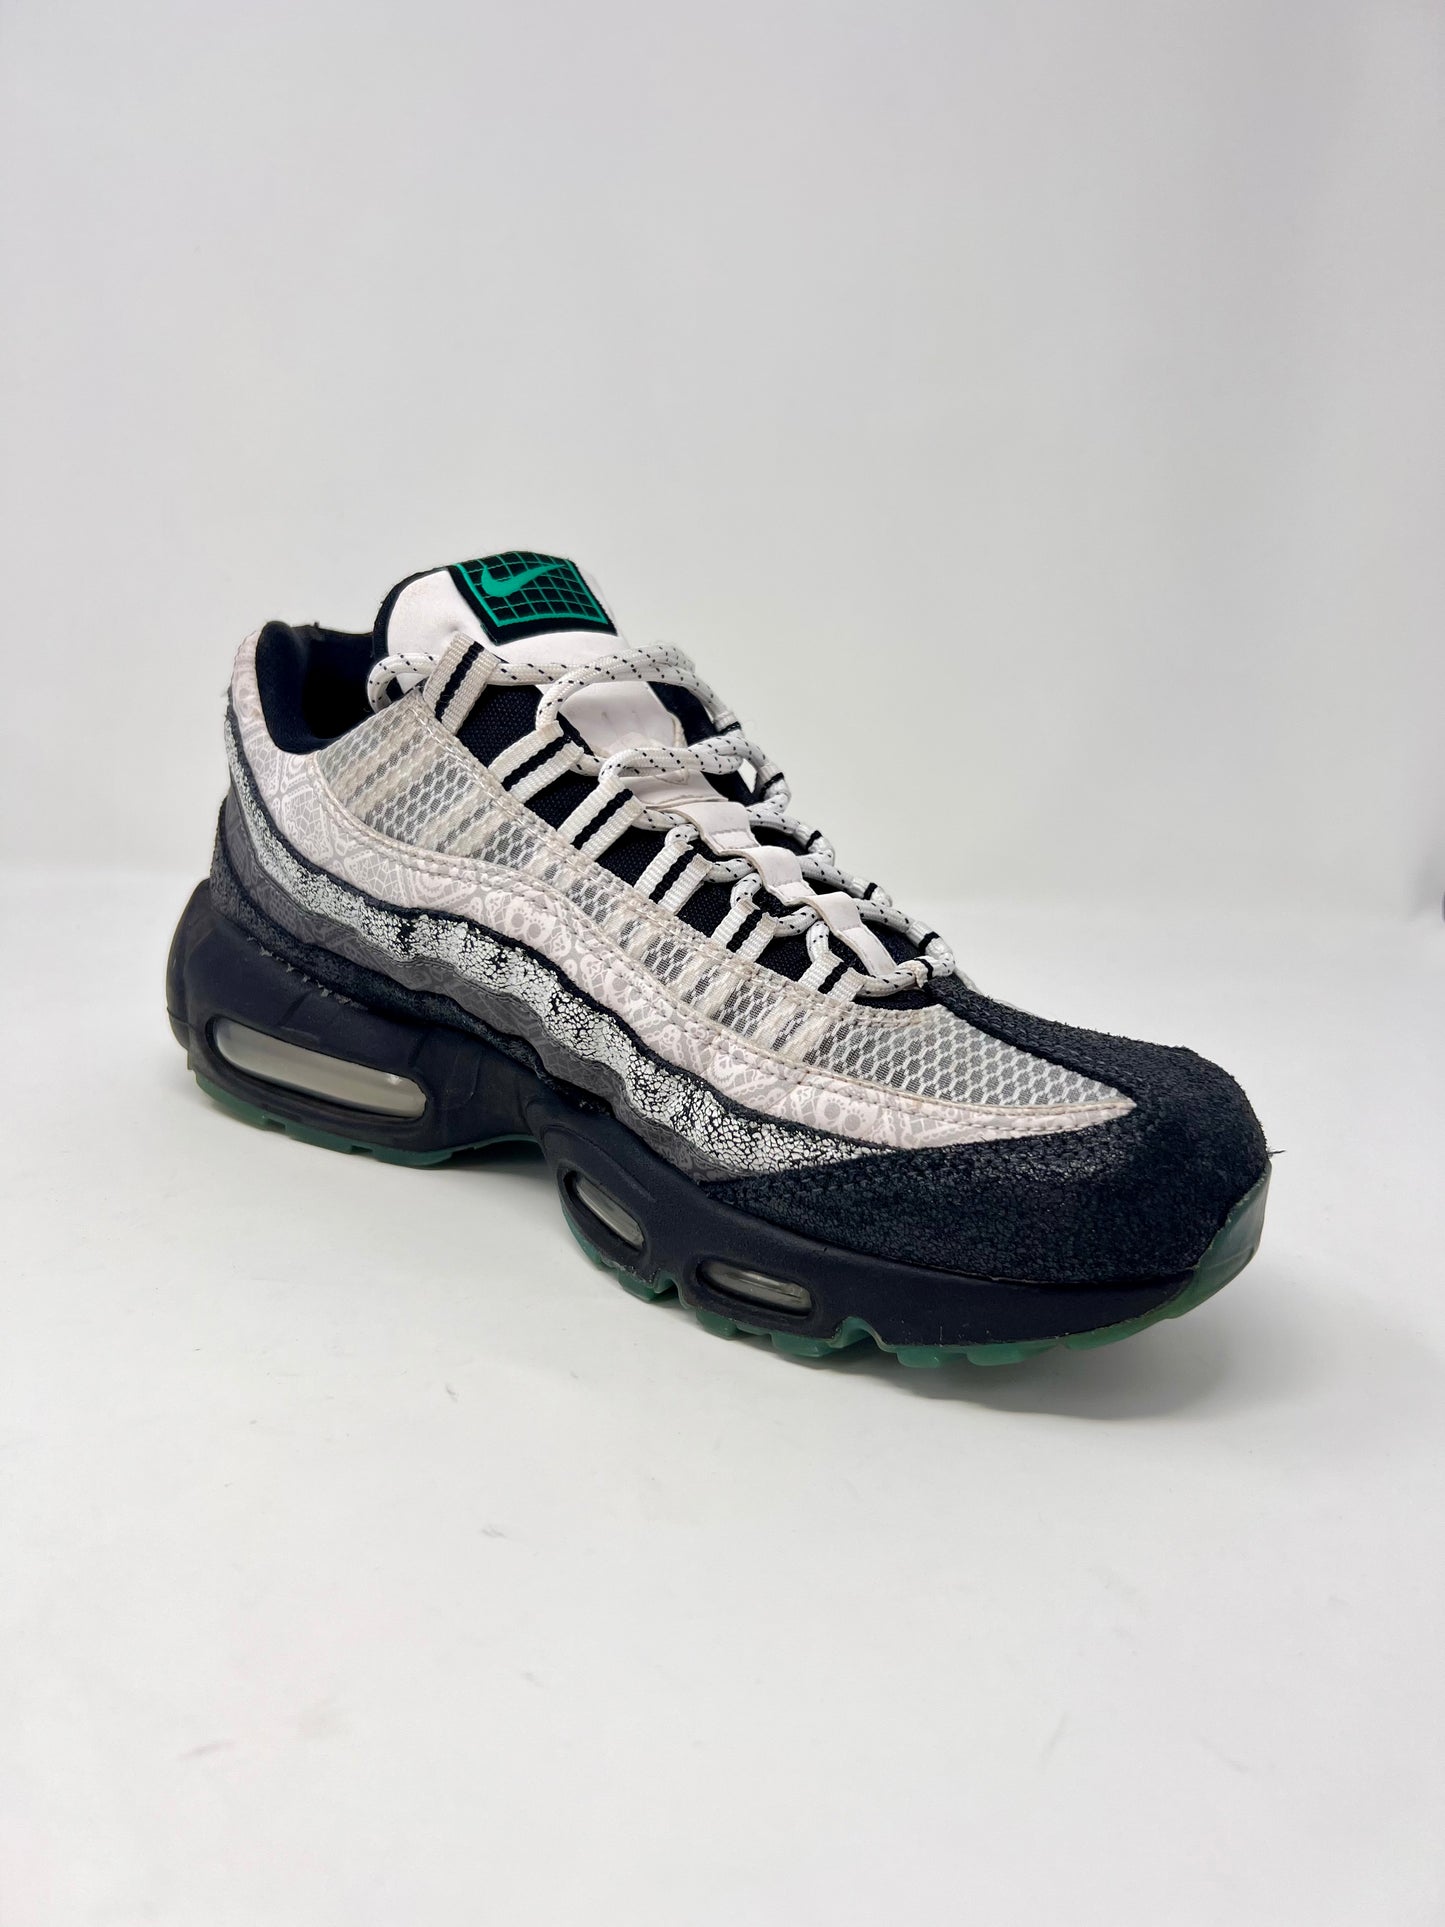 Nike Air Max 95 Day Of The Dead UK7.5